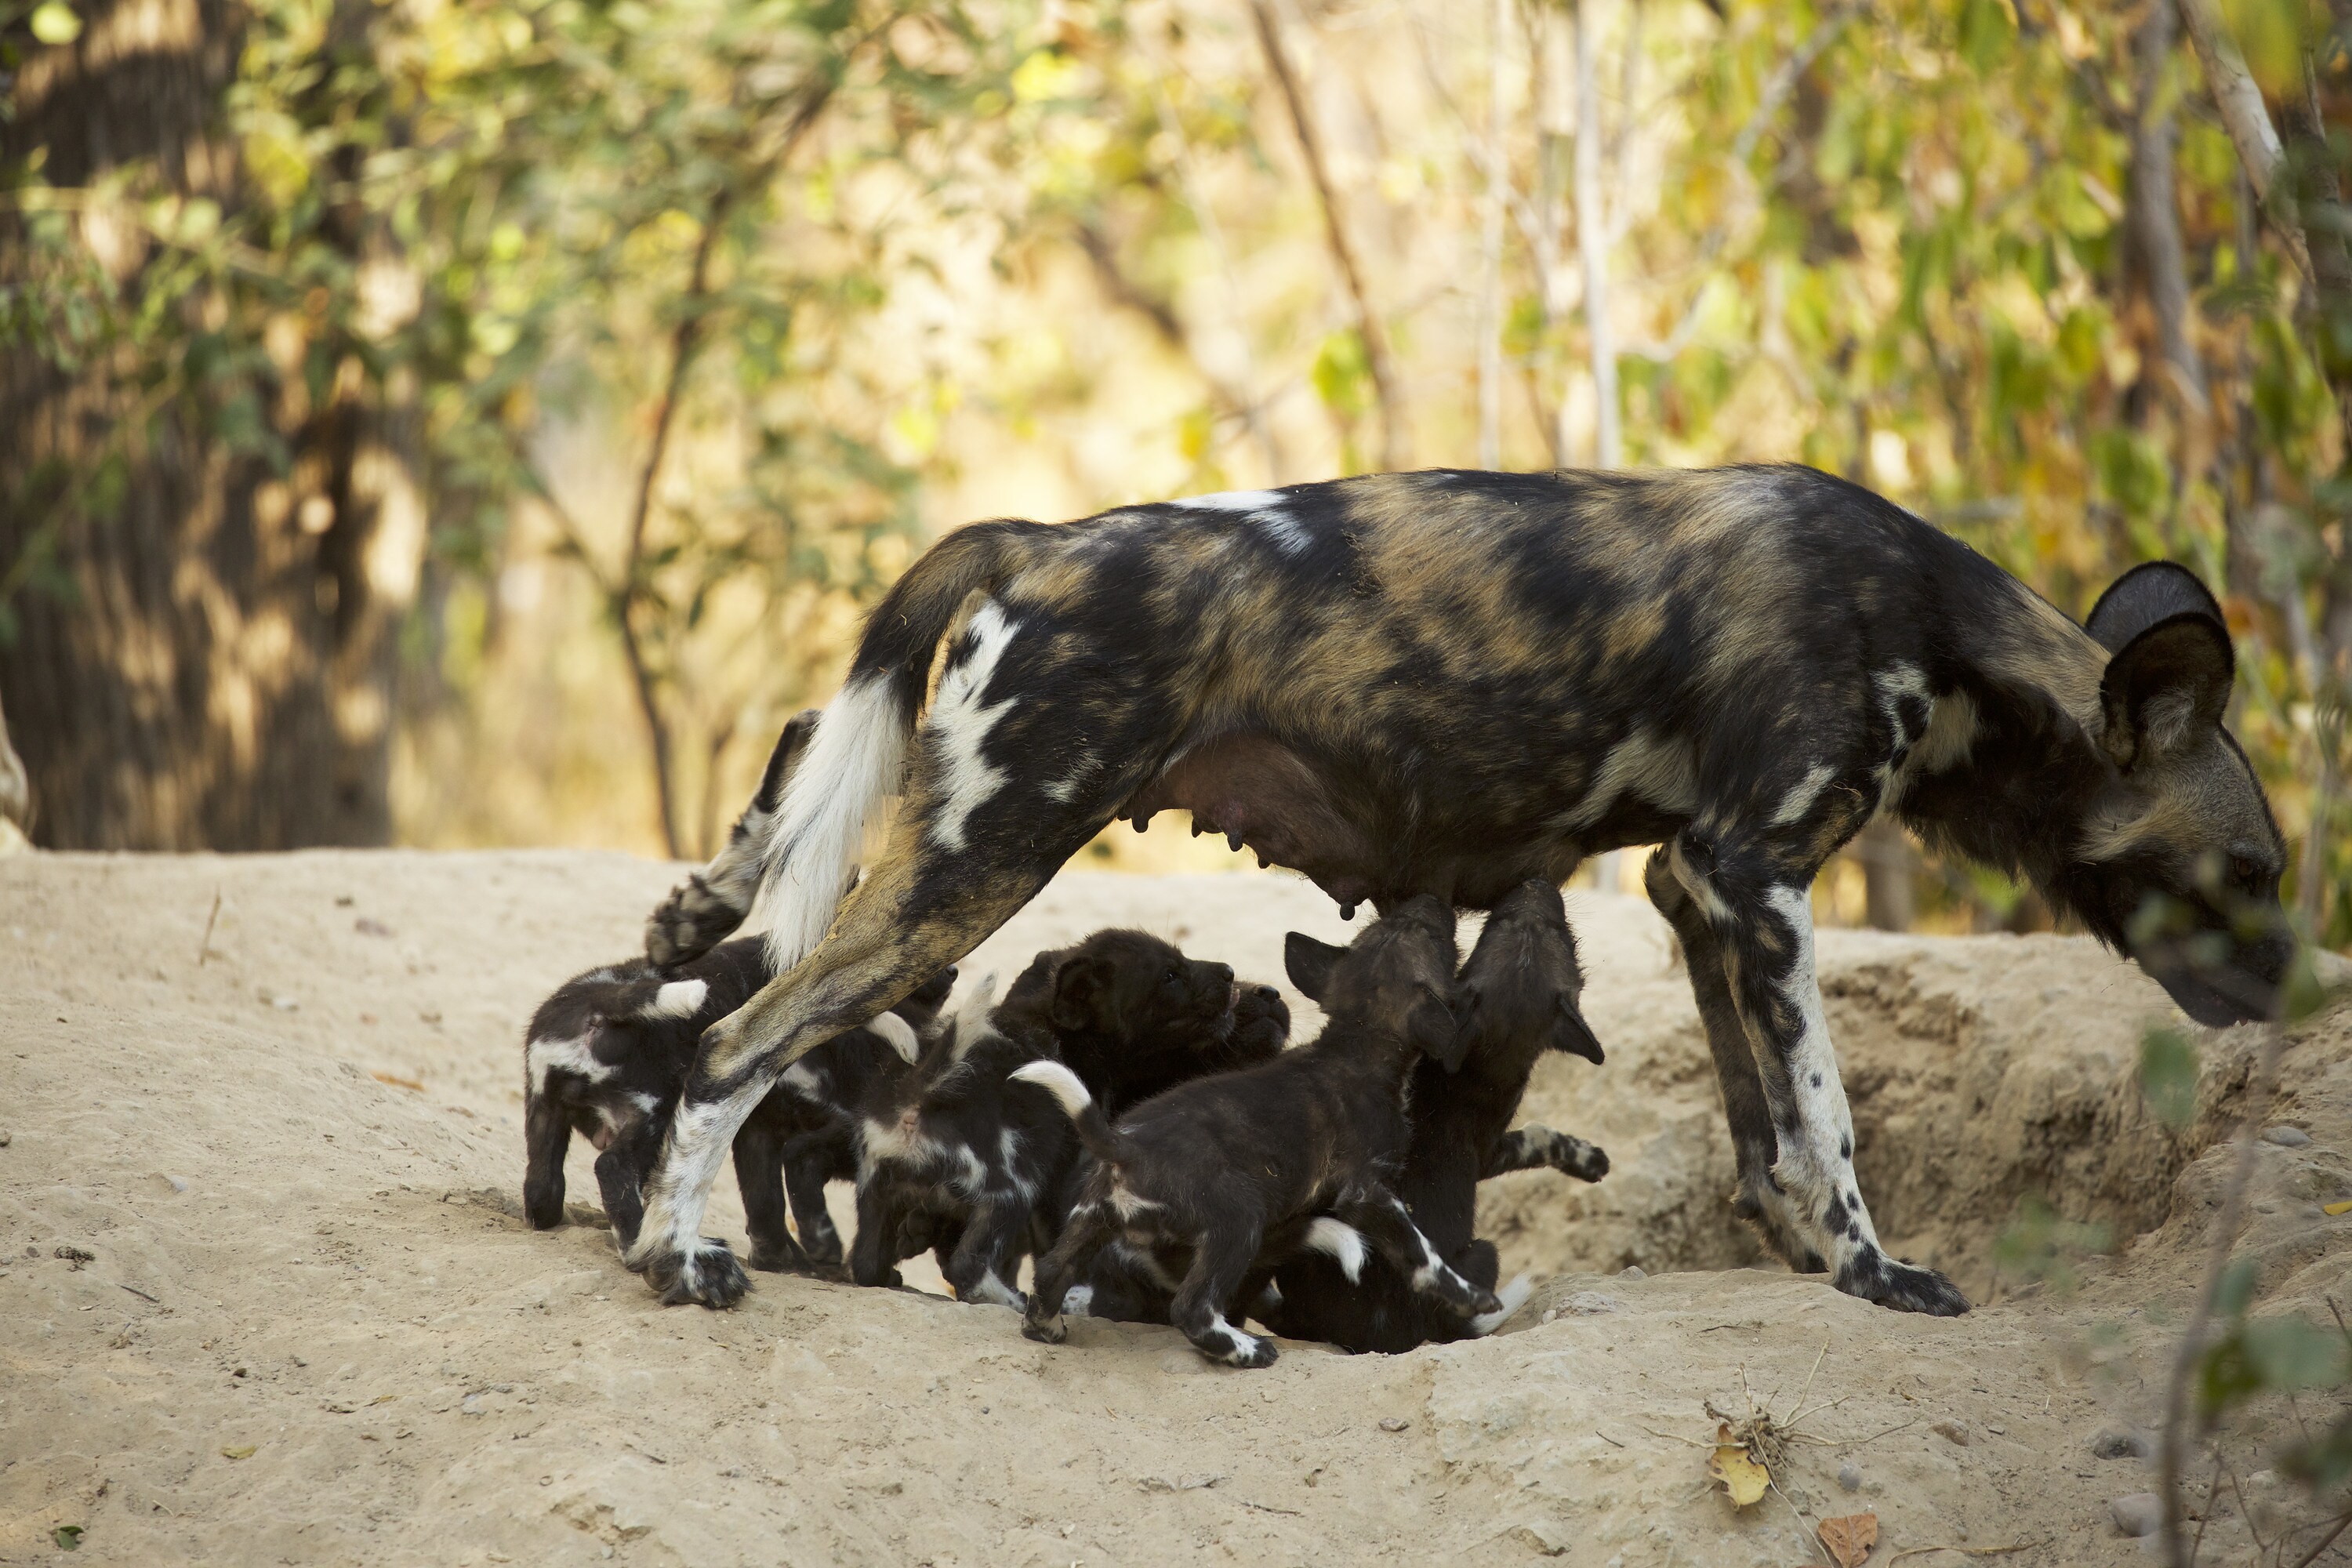 Coco stands with puppies reaching to feed. (National Geographic for Disney+/Kim Wolhuter)